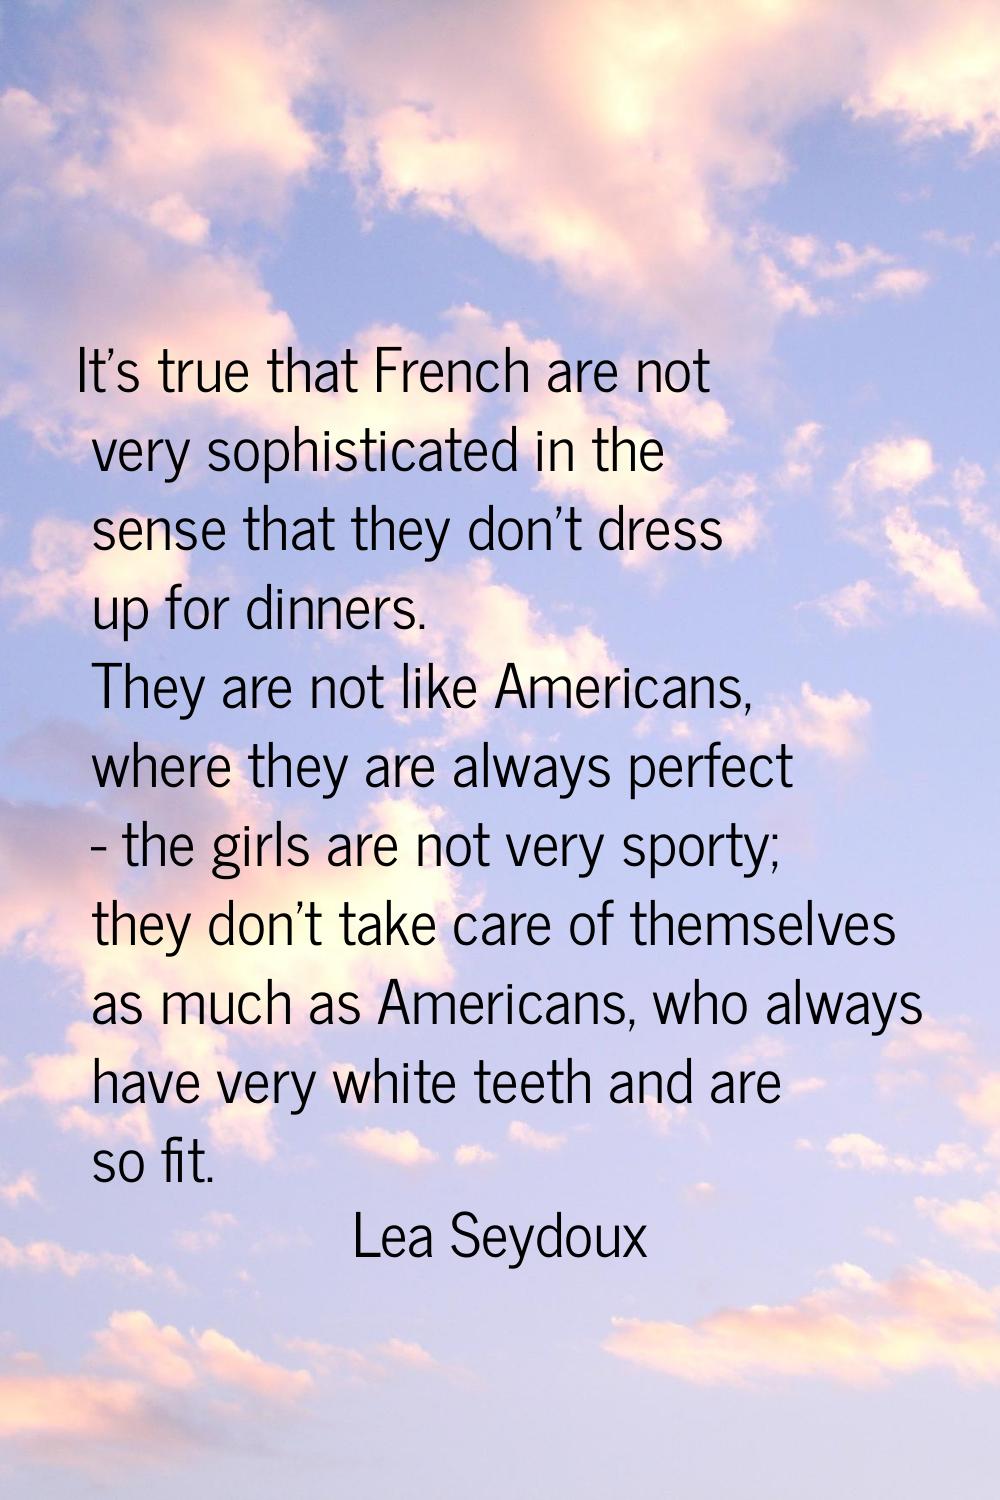 It's true that French are not very sophisticated in the sense that they don't dress up for dinners.